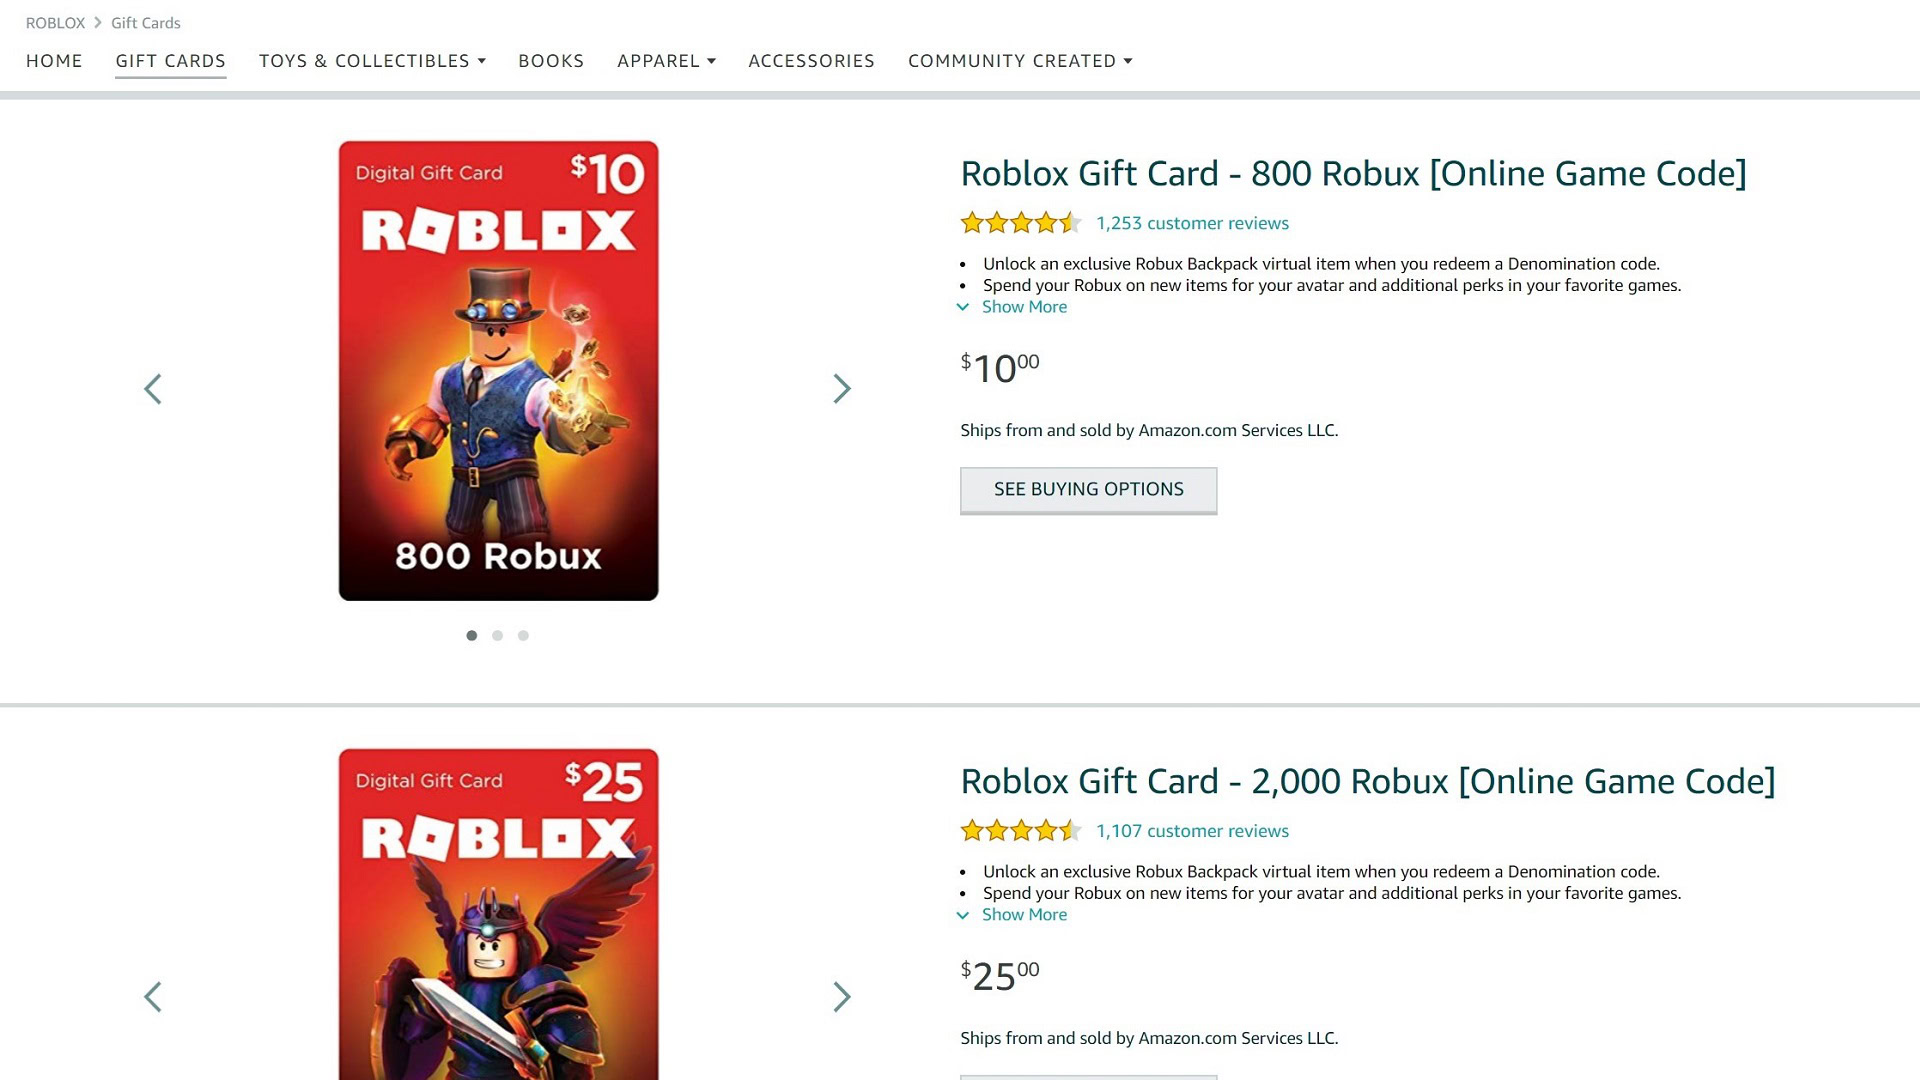 $100 Roblox Game Card  Code Sent via Email Delivery